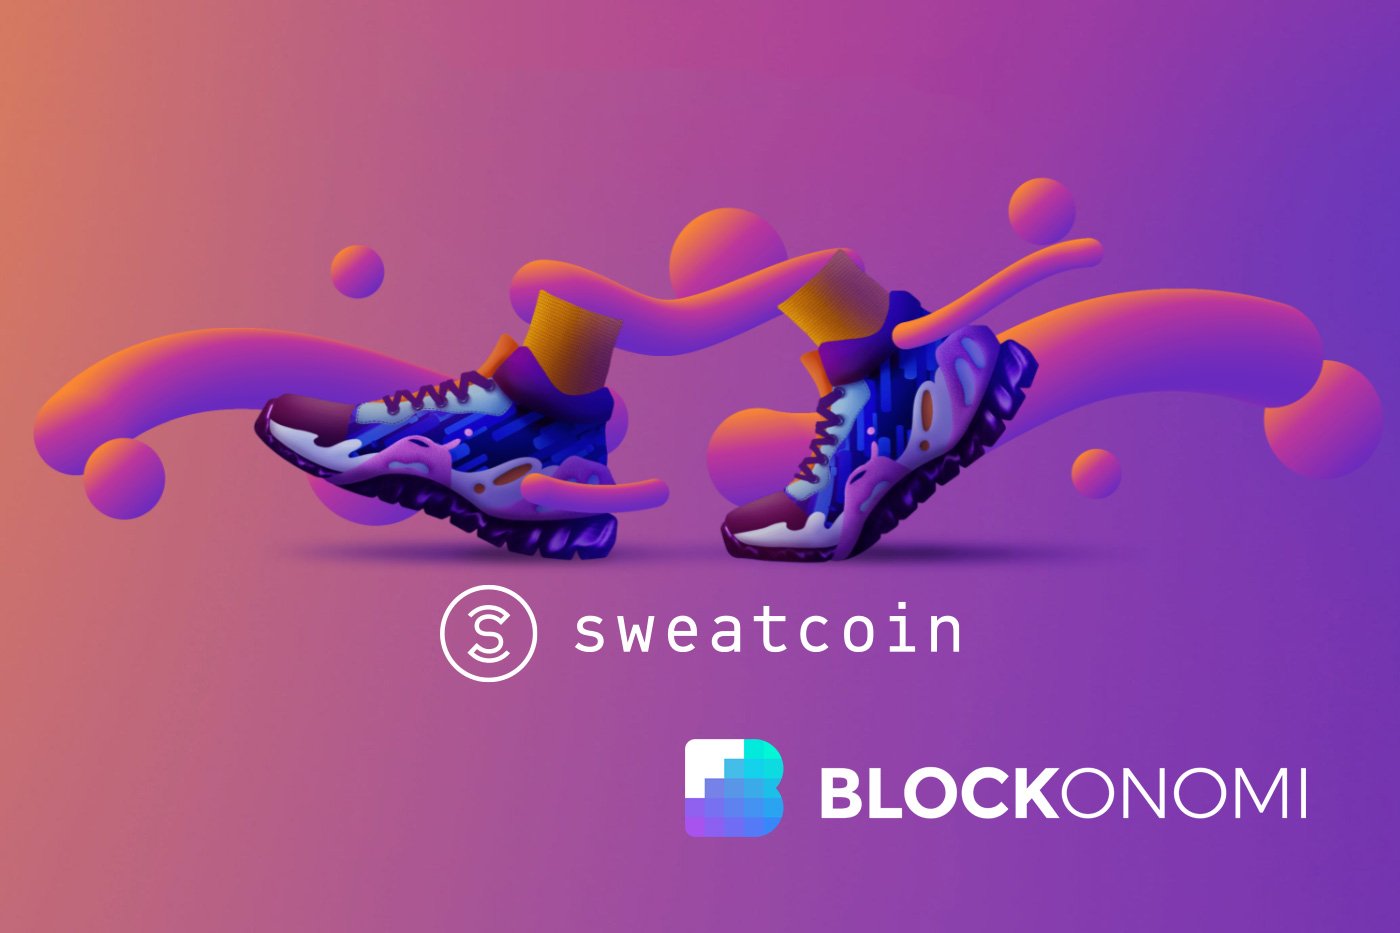 Sweatcoin - Get Paid to Work Out | Suits Me® Blog Blog